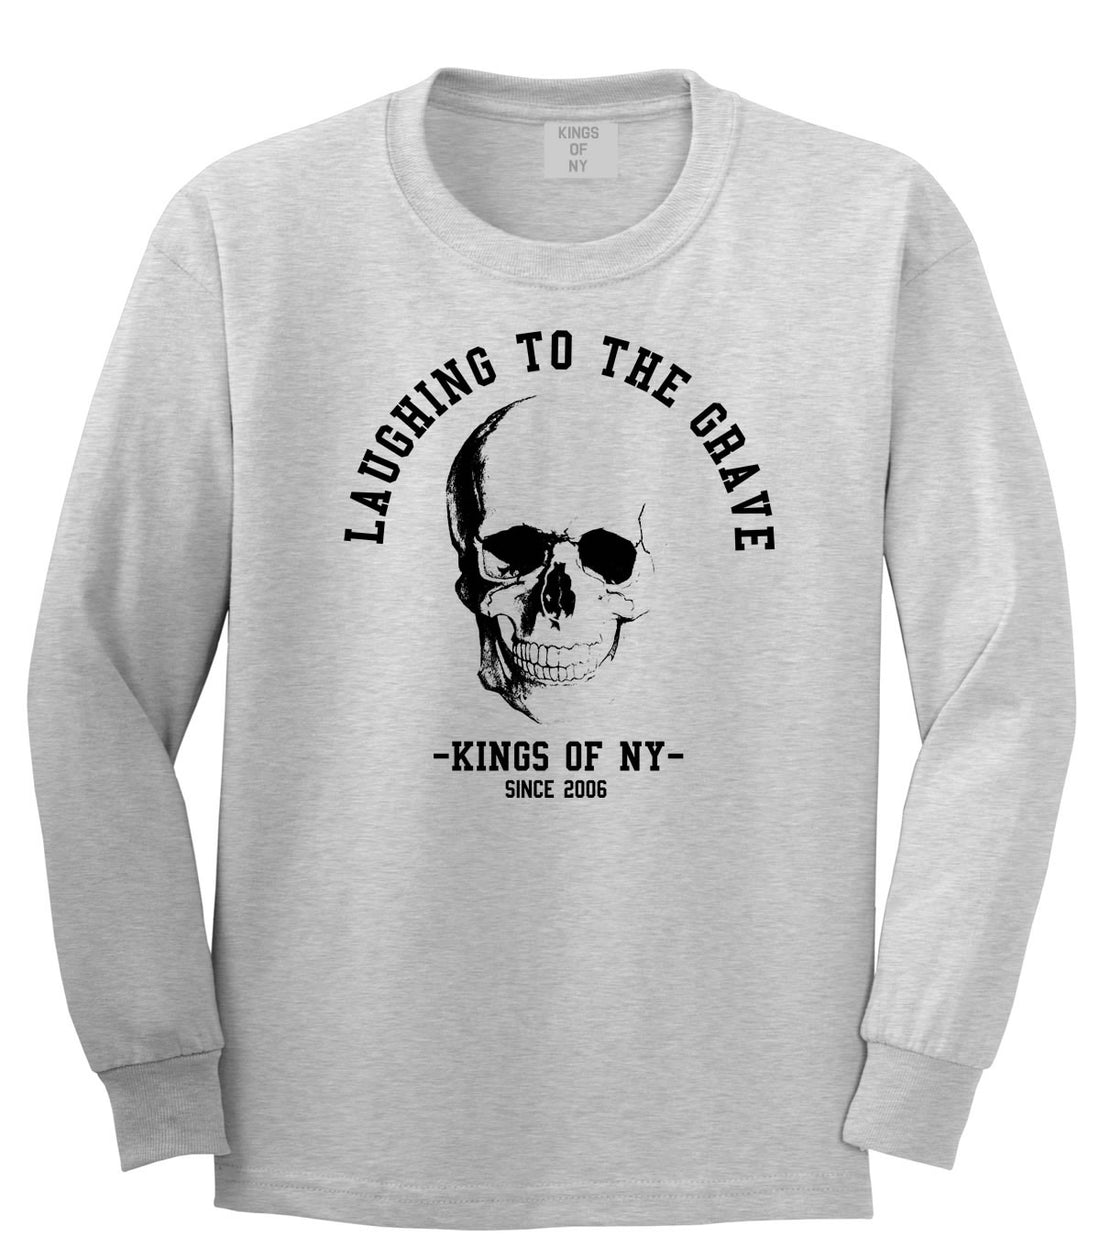 Laughing To The Grave Skull 2006 Long Sleeve T-Shirt in Grey By Kings Of NY